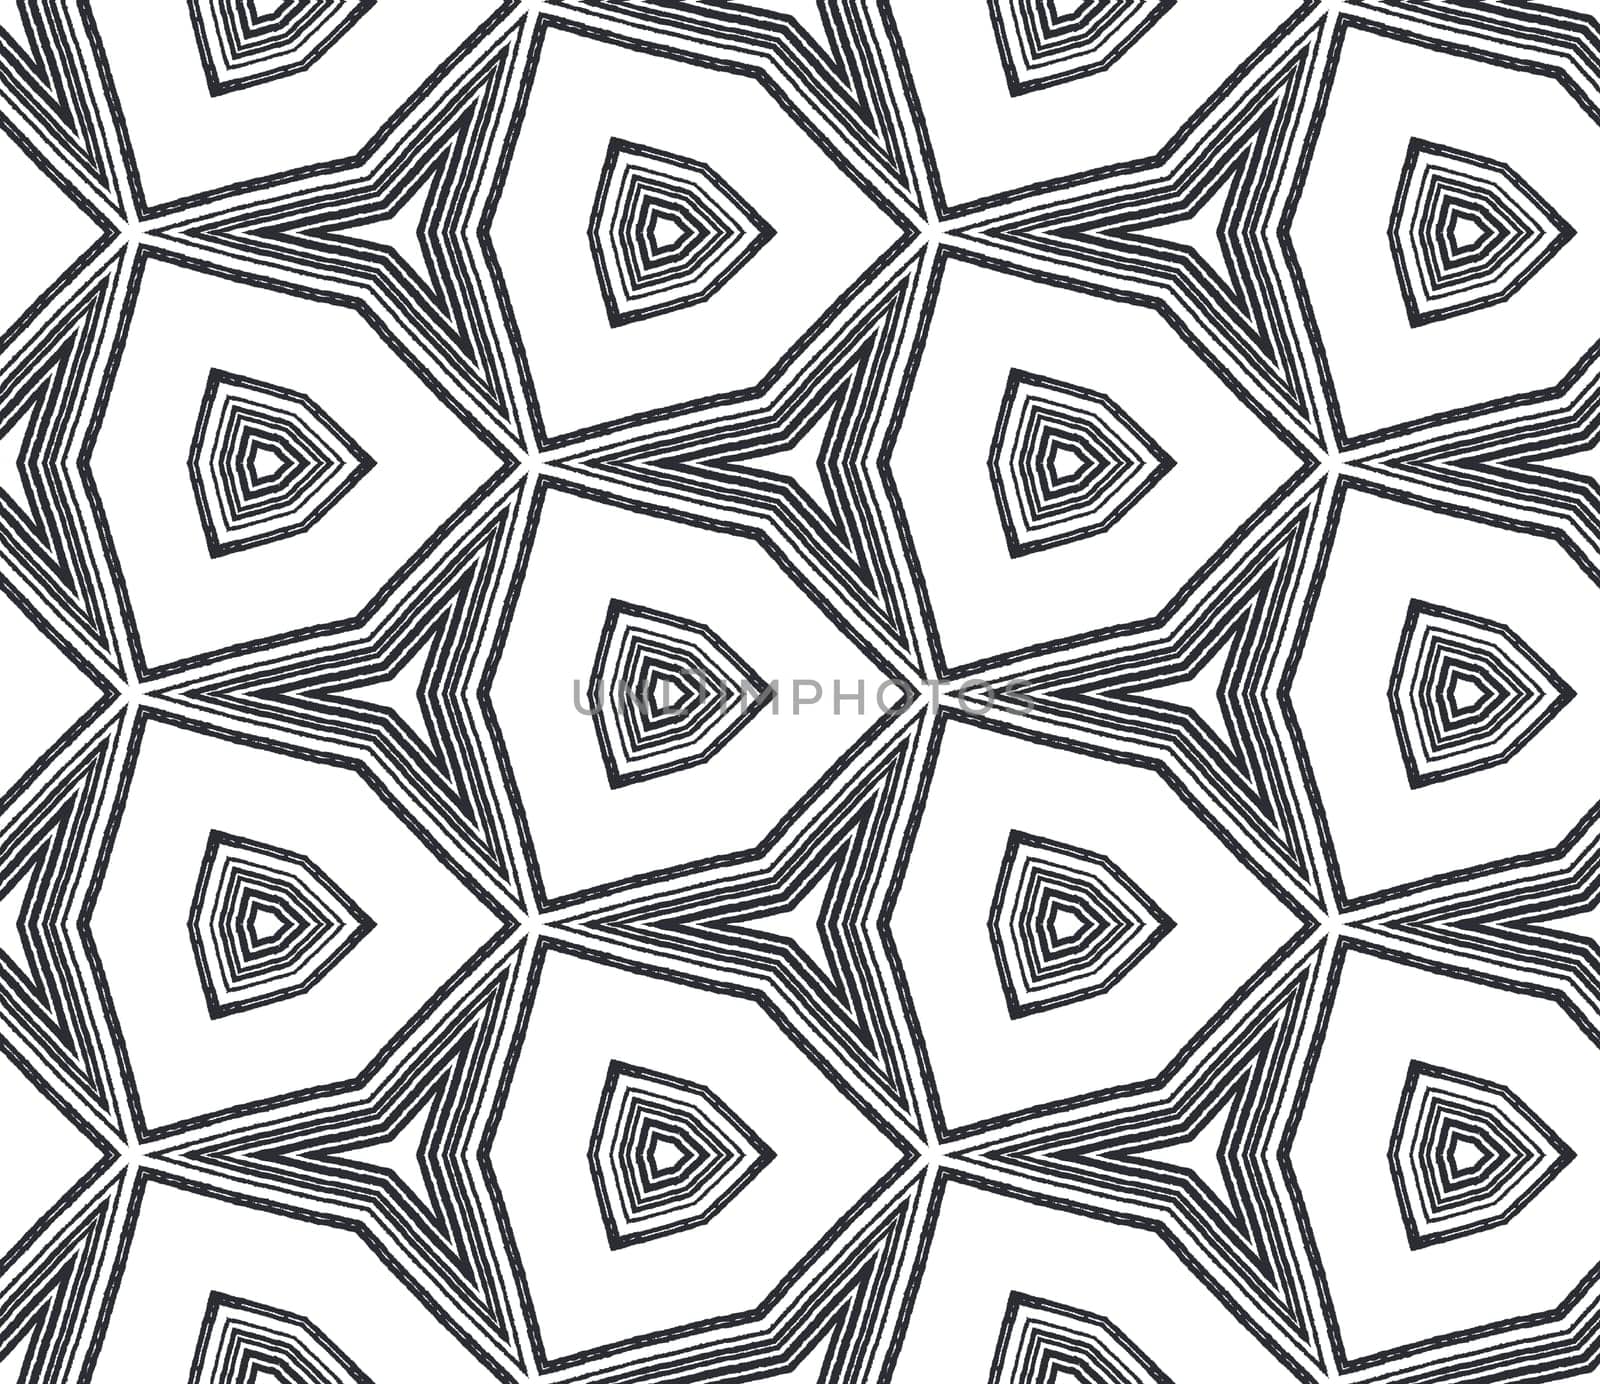 Tiled watercolor pattern. Black symmetrical kaleidoscope background. Textile ready bewitching print, swimwear fabric, wallpaper, wrapping. Hand painted tiled watercolor seamless.